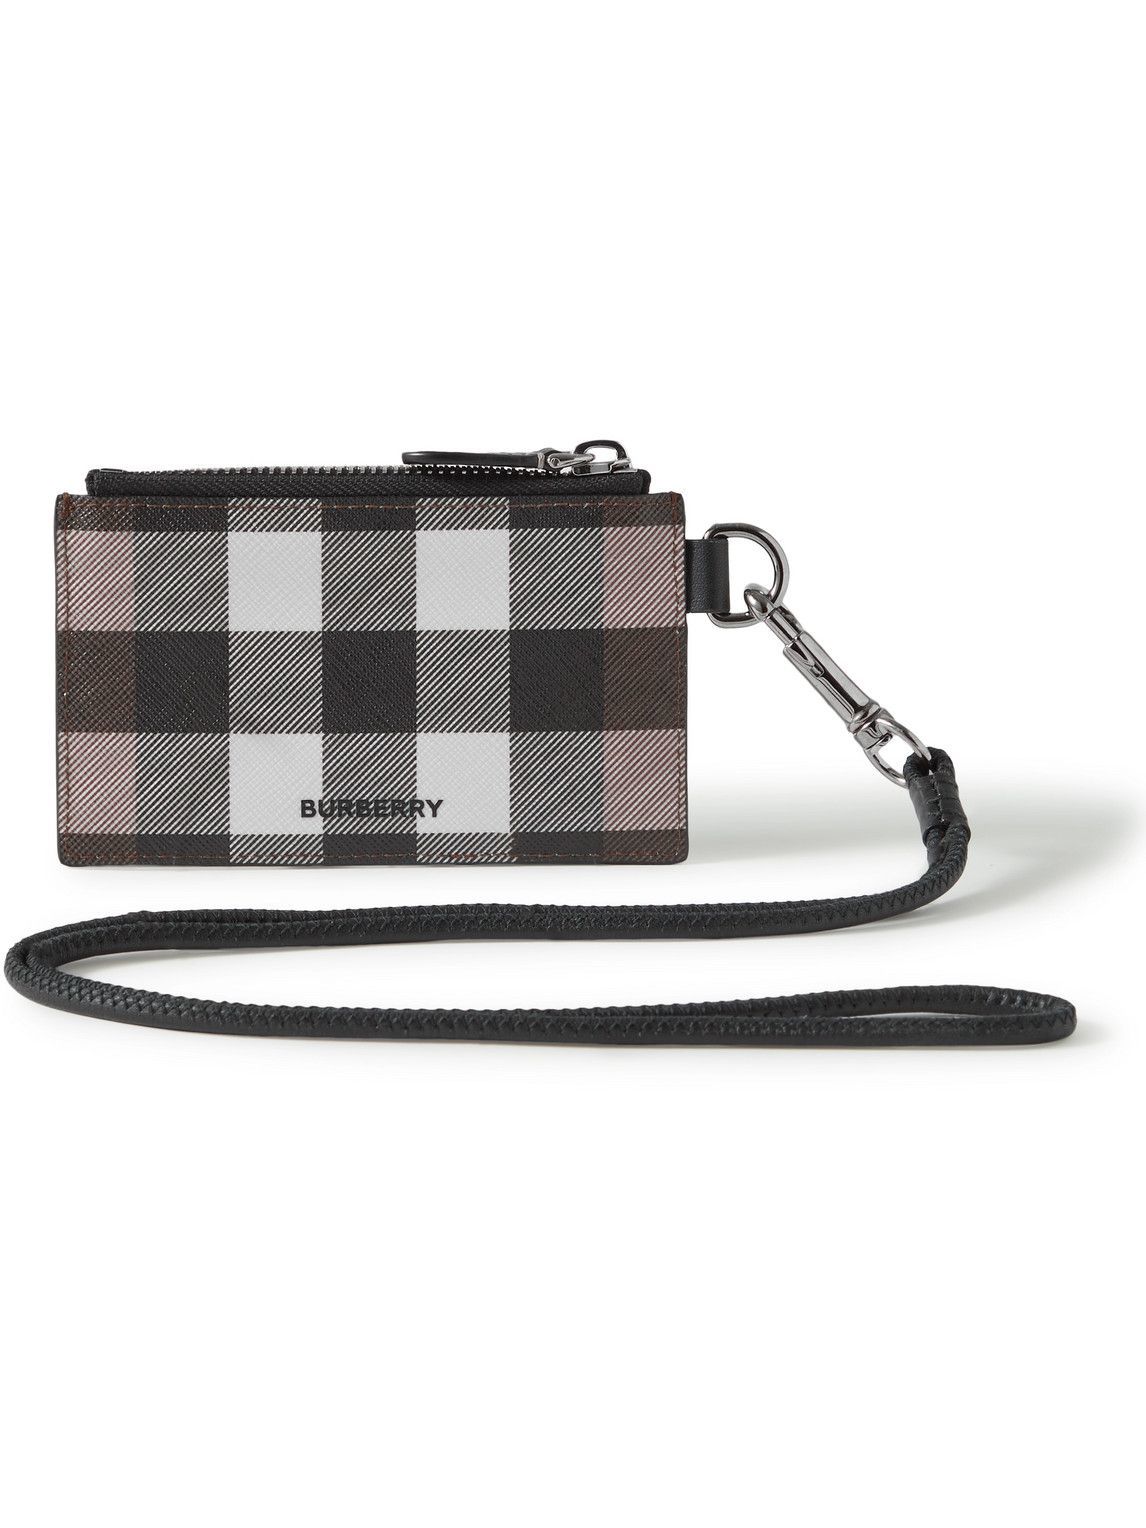 Photo: Burberry - Leather-Trimmed Checked E-Canvas Cardholder with Lanyard